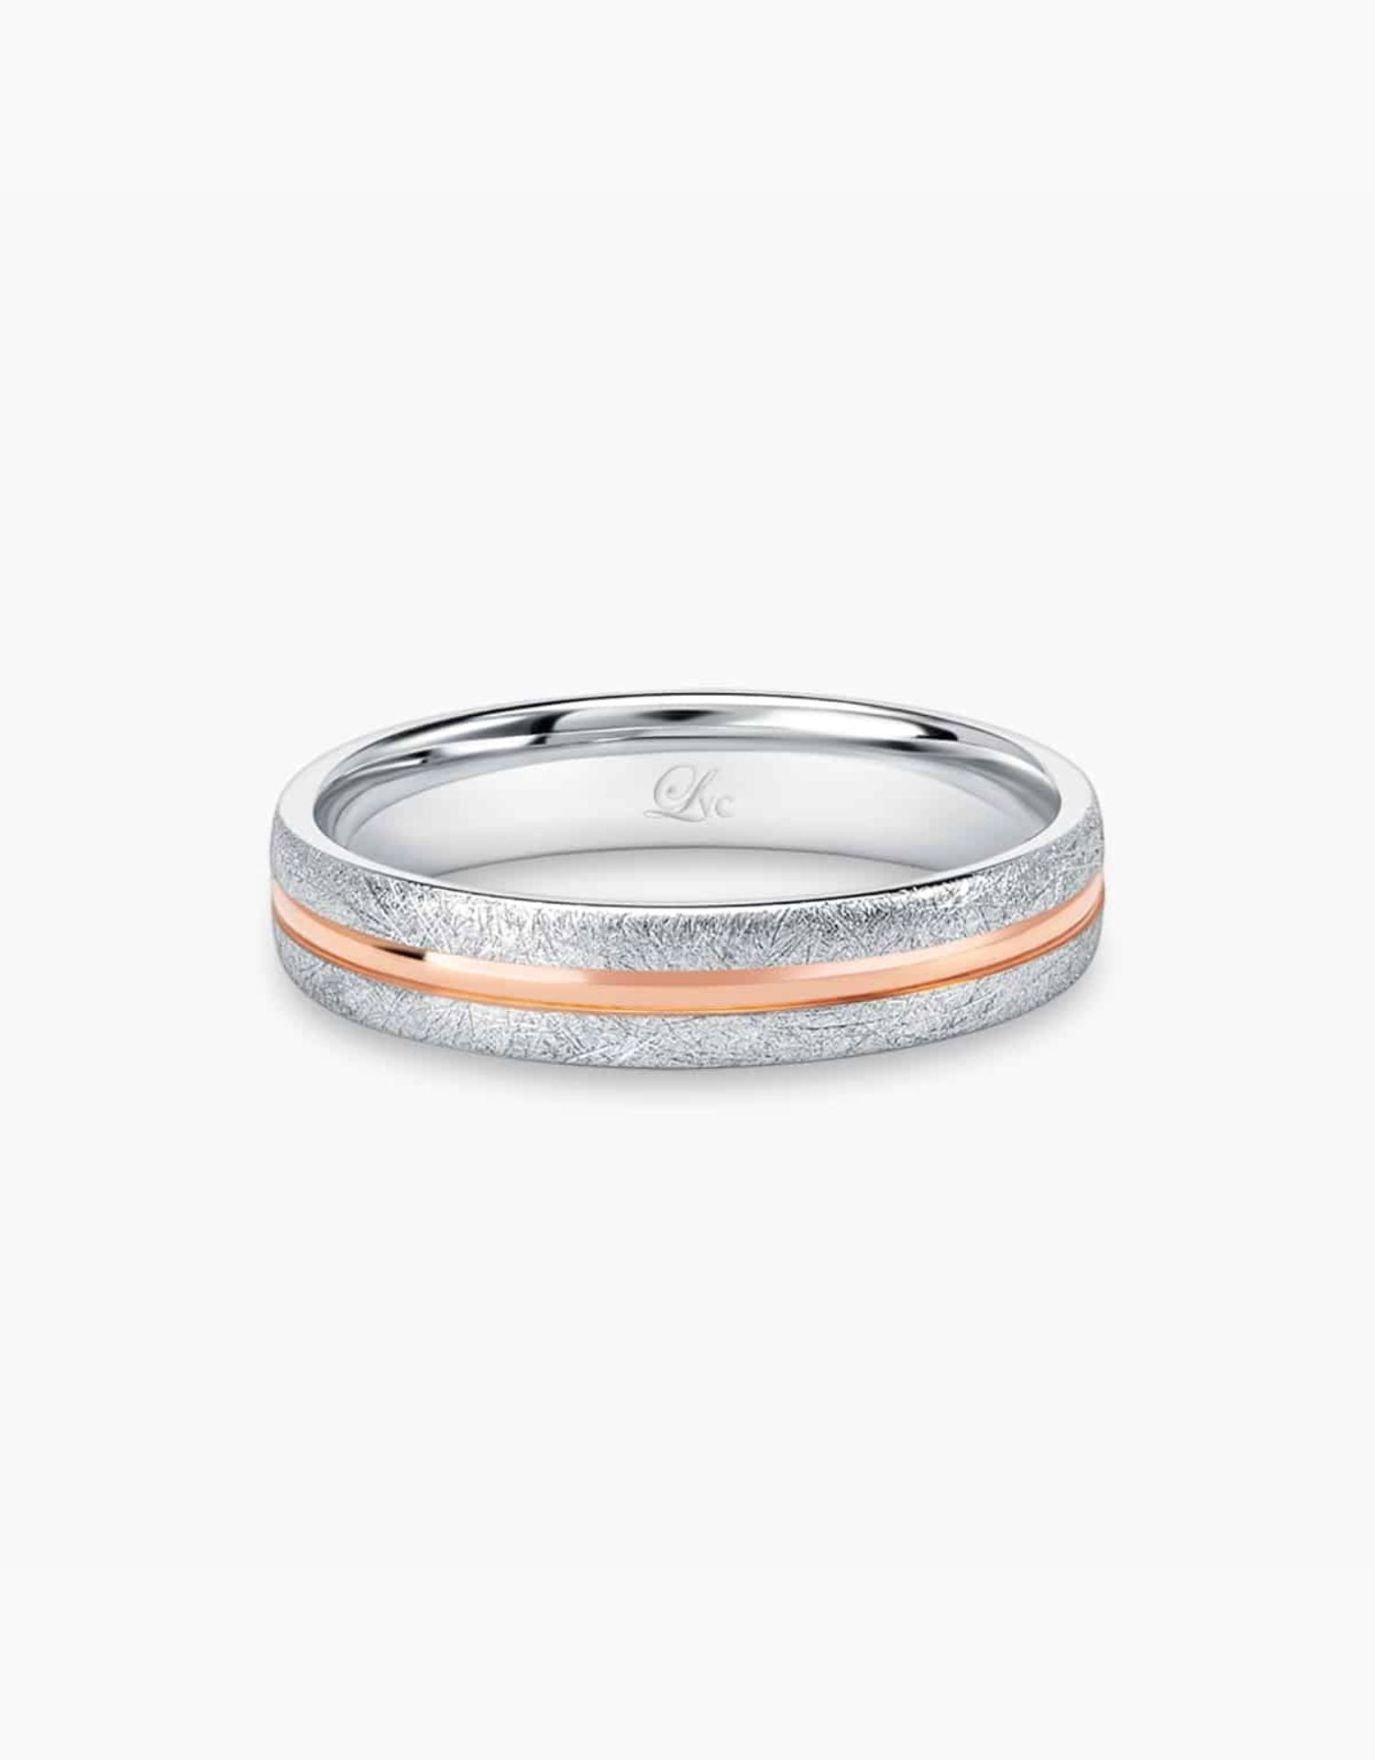 LVC Soleil Wedding Band in Matte and Glossy Finish